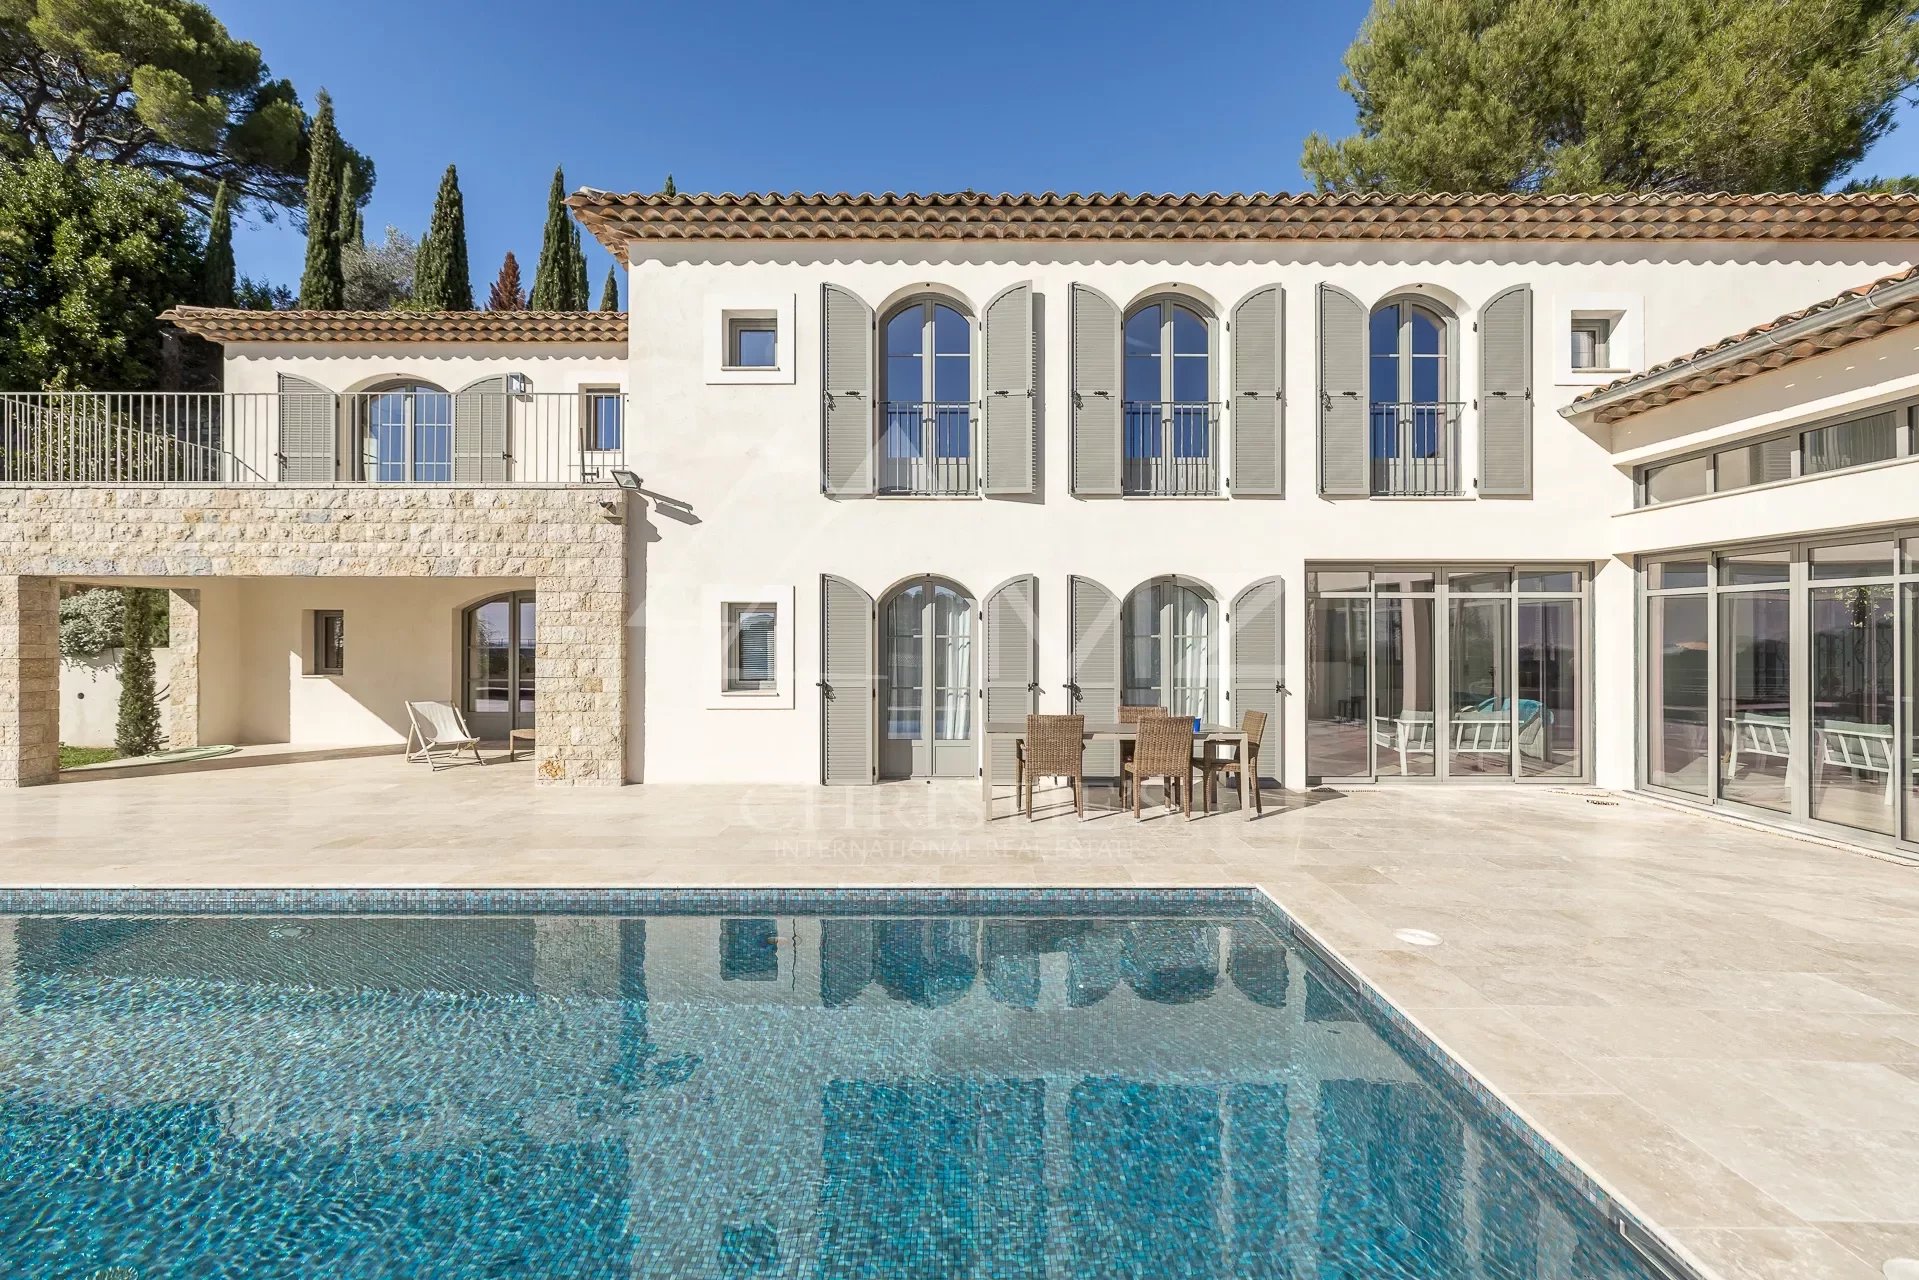 Mougins - Residential area, recent villa with open view on the hills and the sea